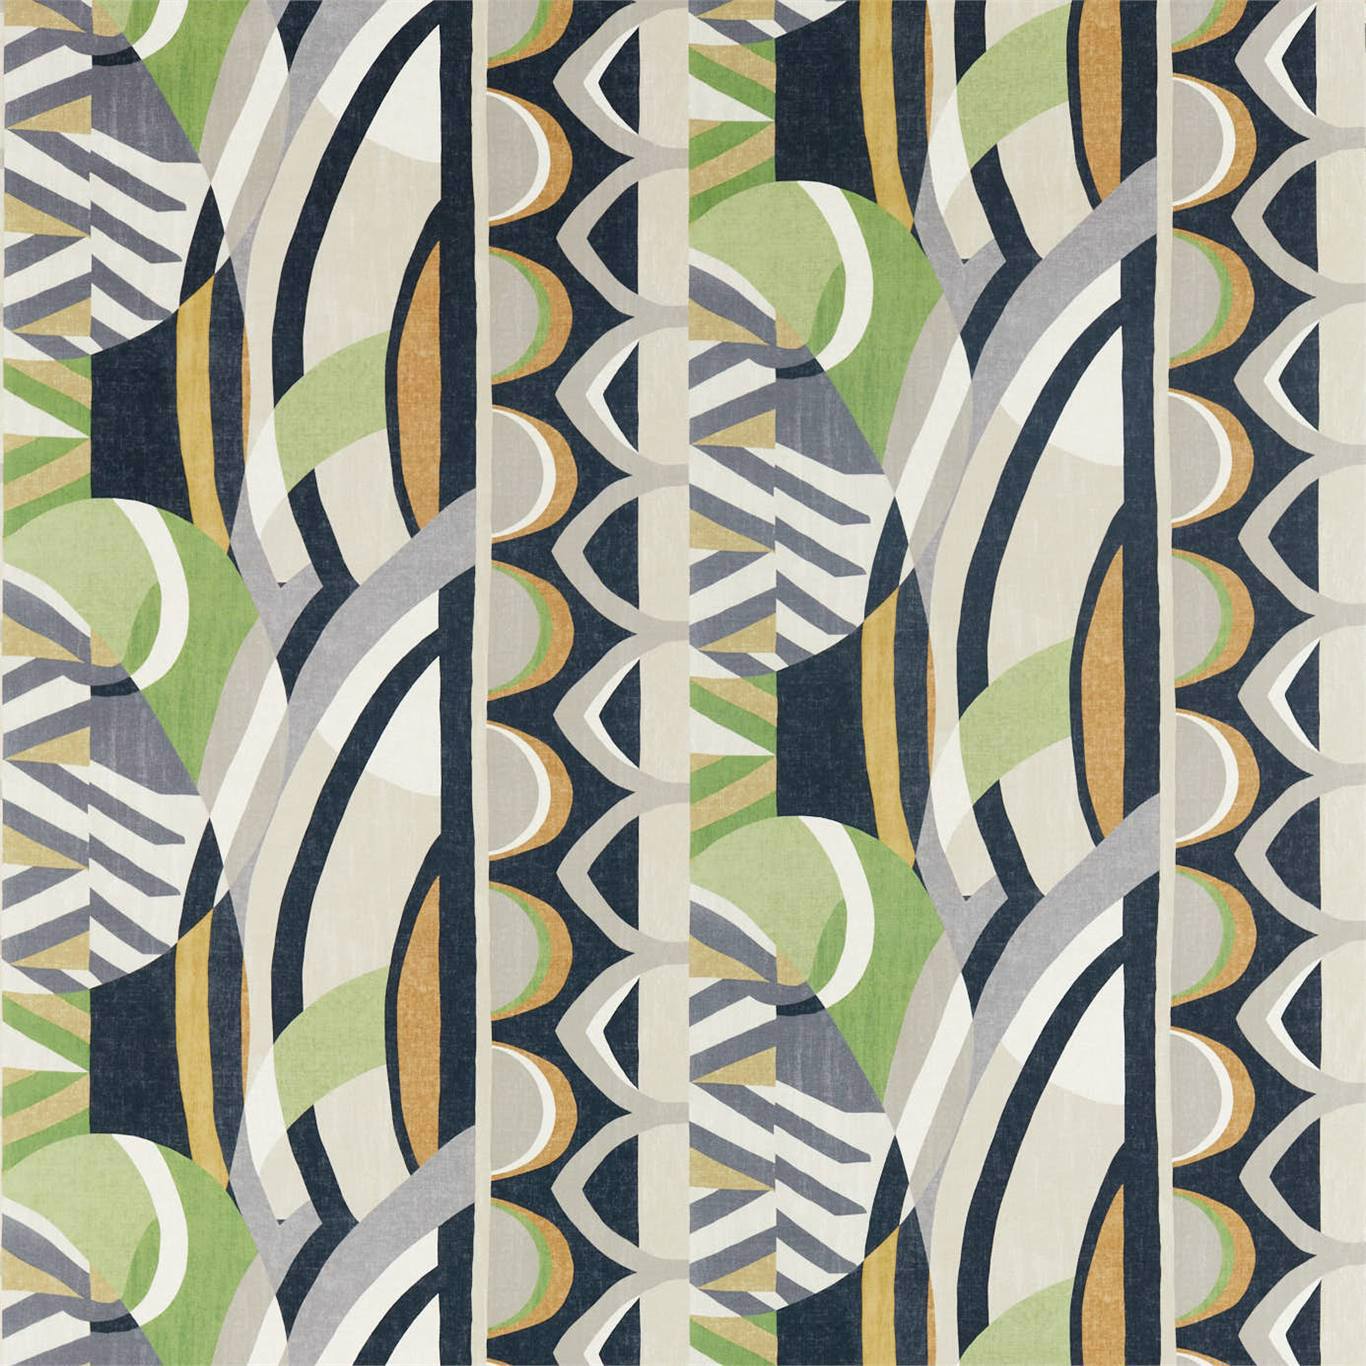 Atelier Fabric by Harlequin - HATL120793 - Saffron / Charcoal / Wasabi